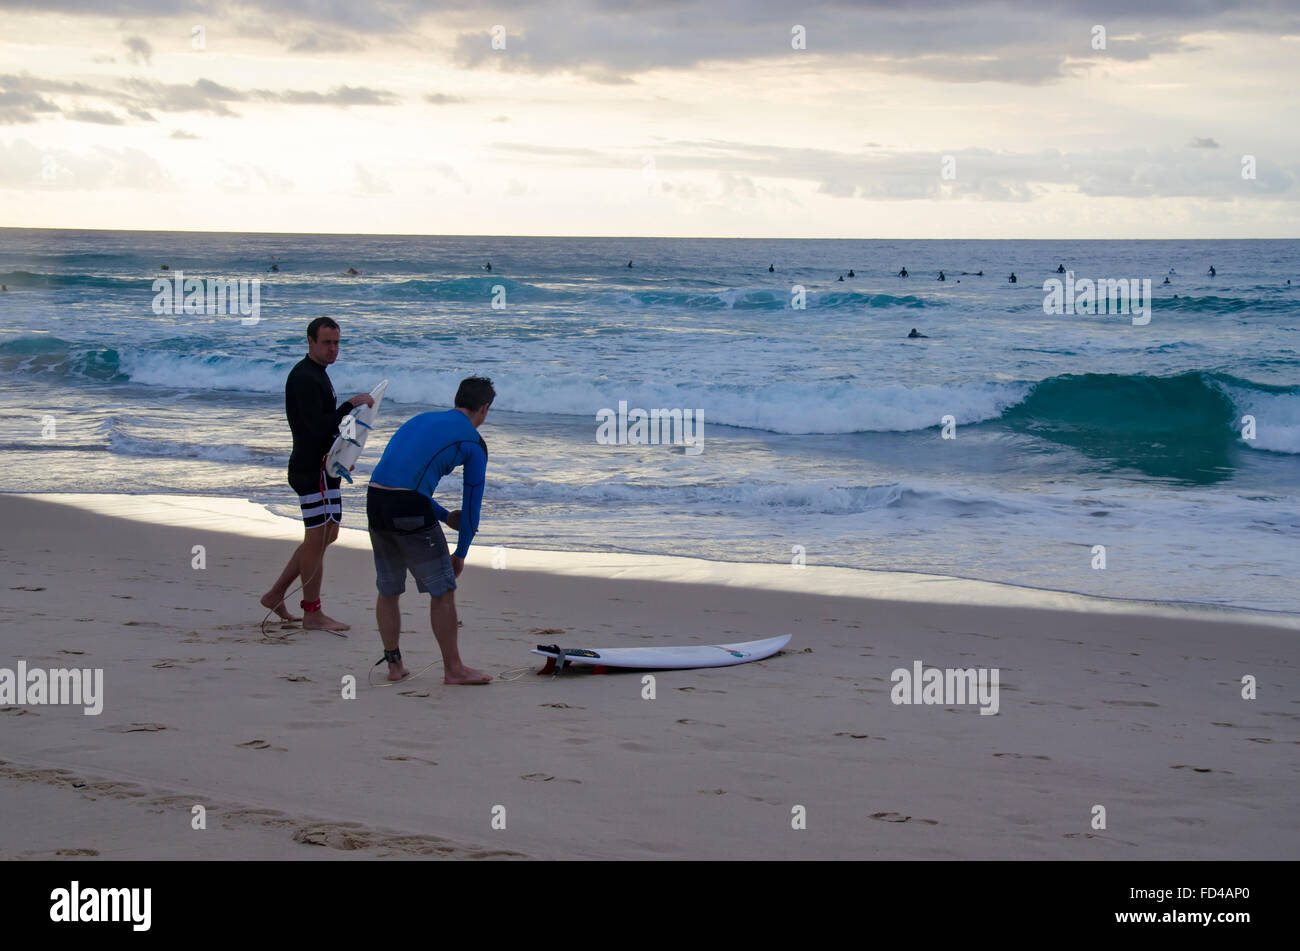 Board riders prepare to enter the water early in the morning at Bondi Beach in Sydney, Australia Stock Photo